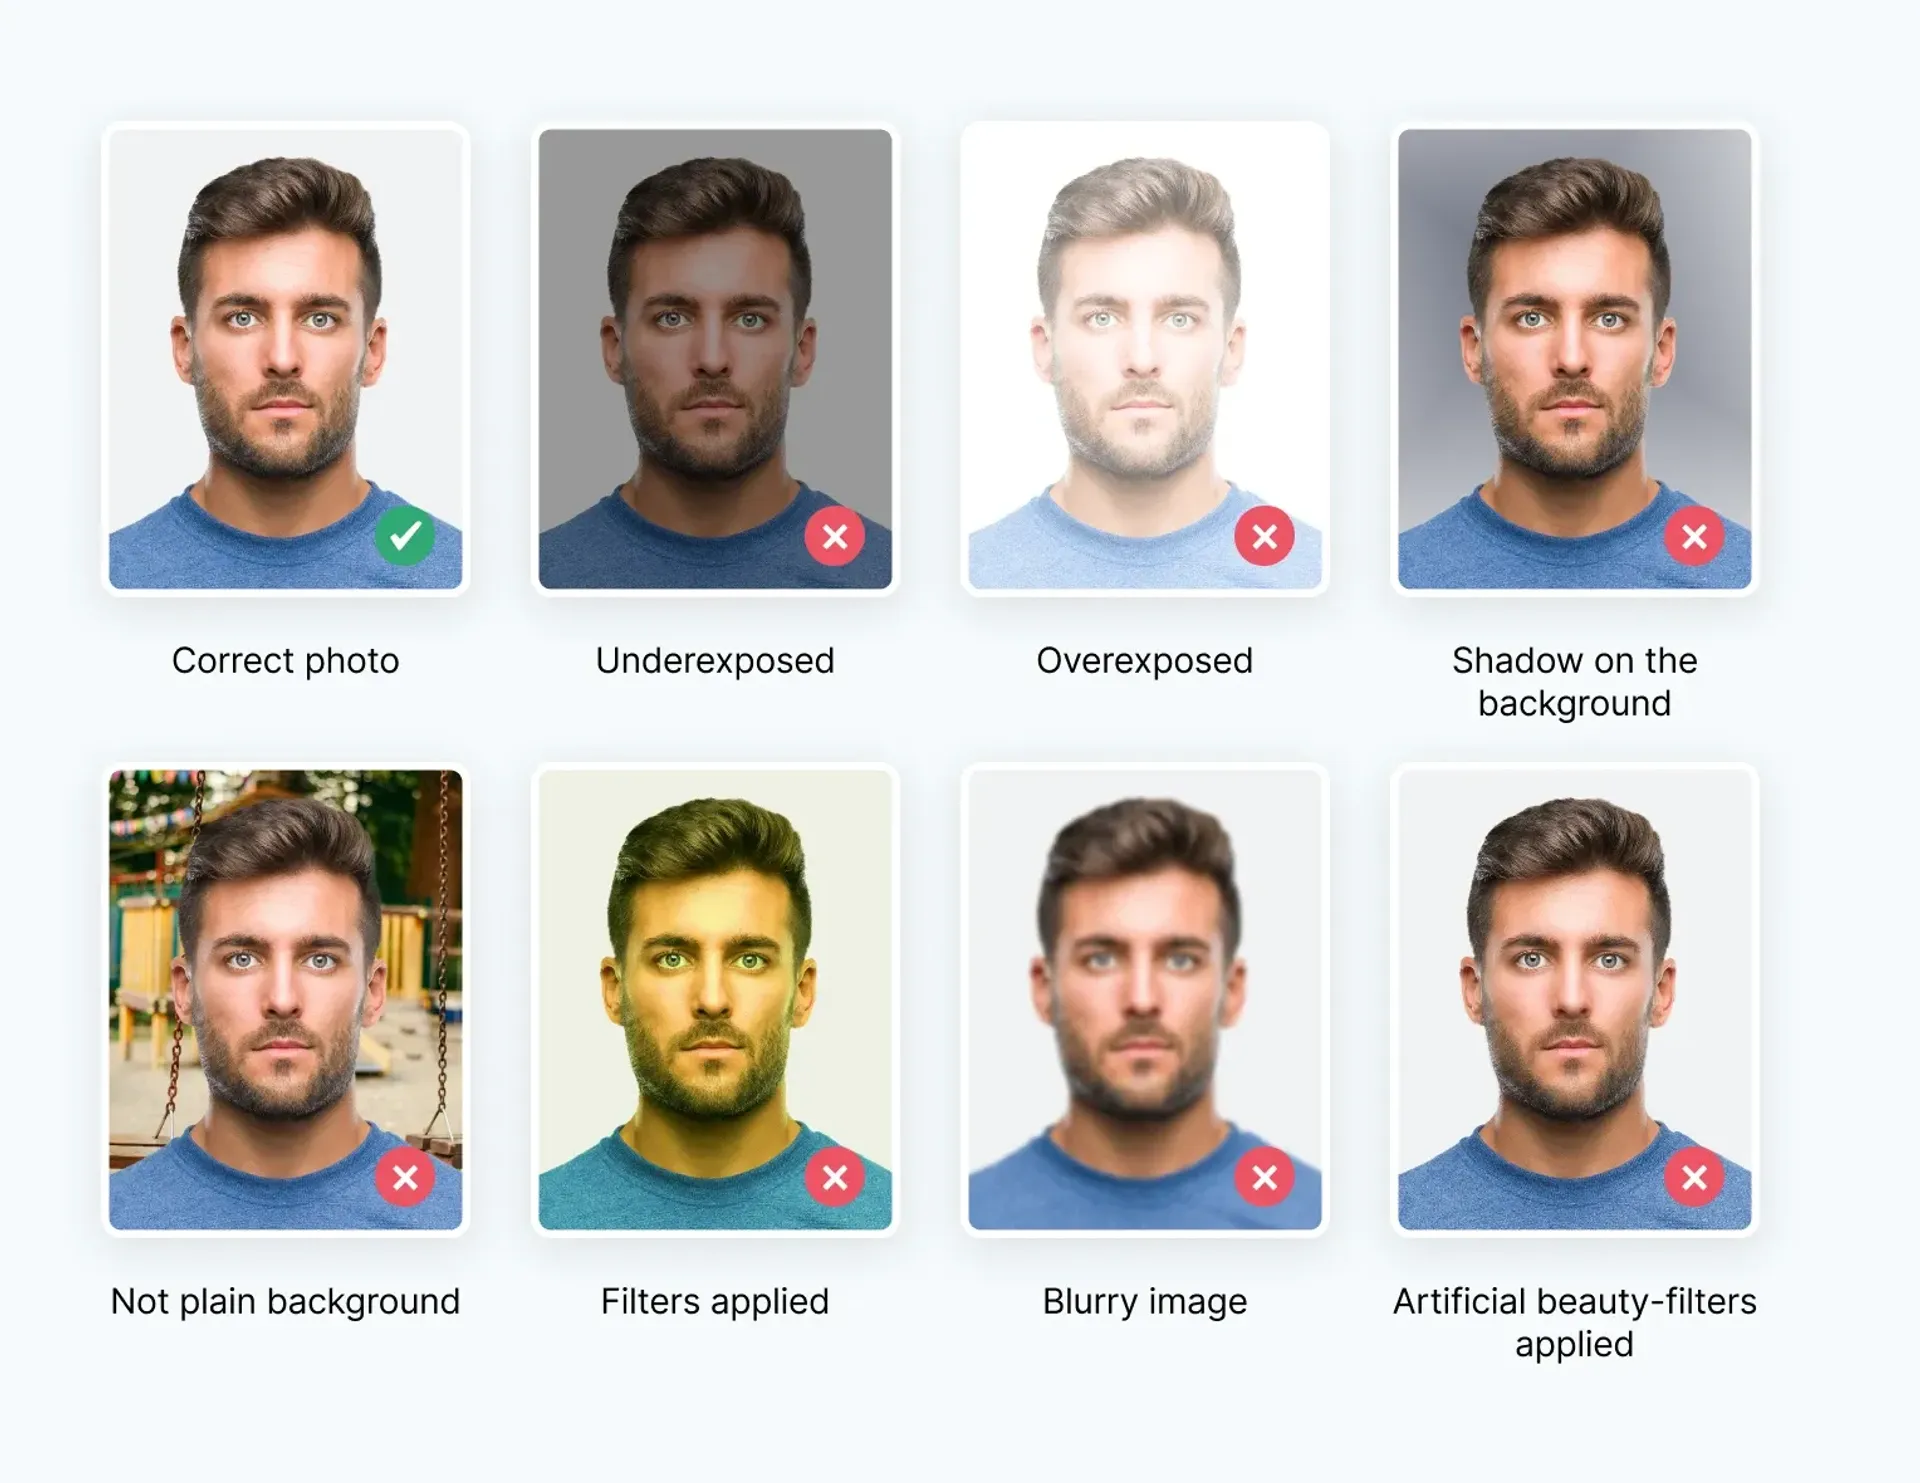 The do’s and don’ts of New Zealand visa photos—visualized